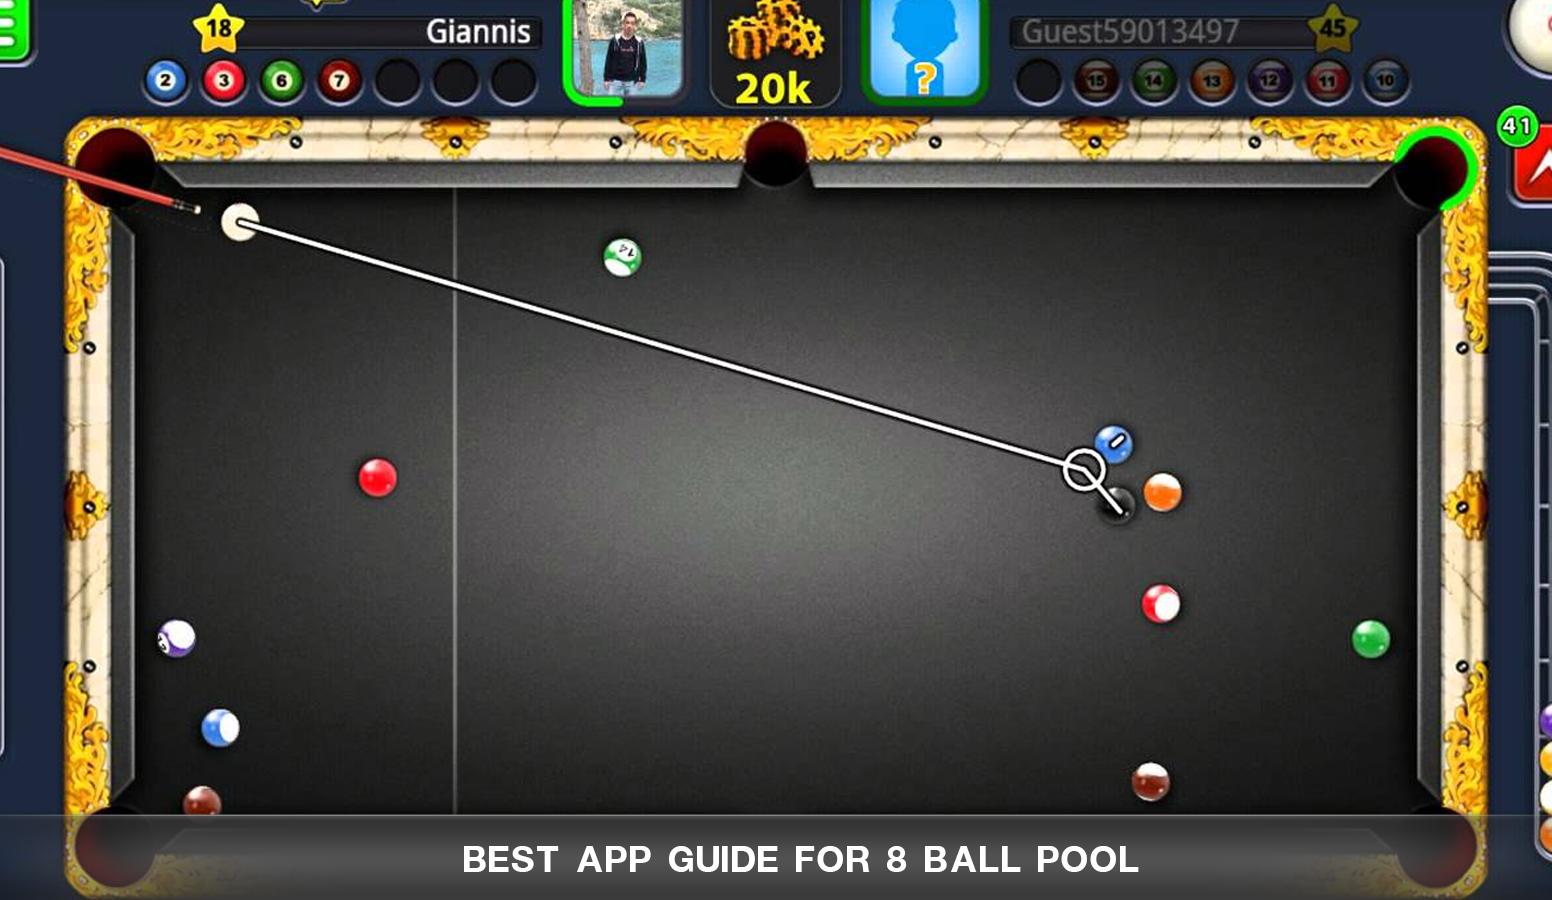 8 ball pool patcher apk download.